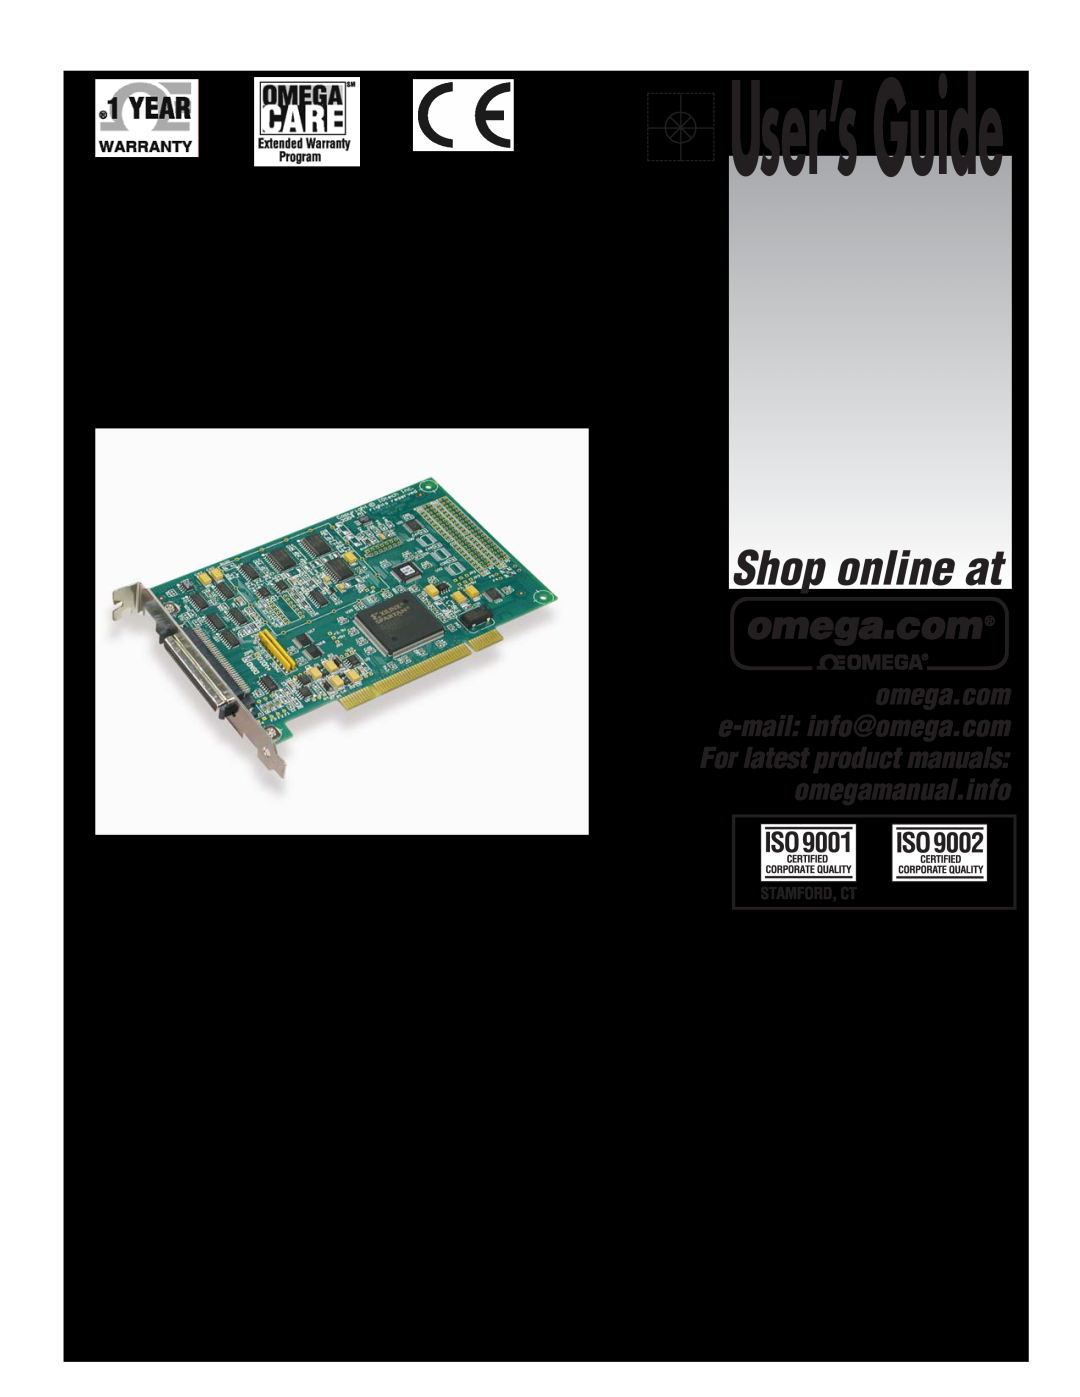 Omega manual 16-Bit, 200-KHz PCI Data Acquisition Boards, User’s Guide, OMB-DAQBOARD-500 Series, Shop online at 